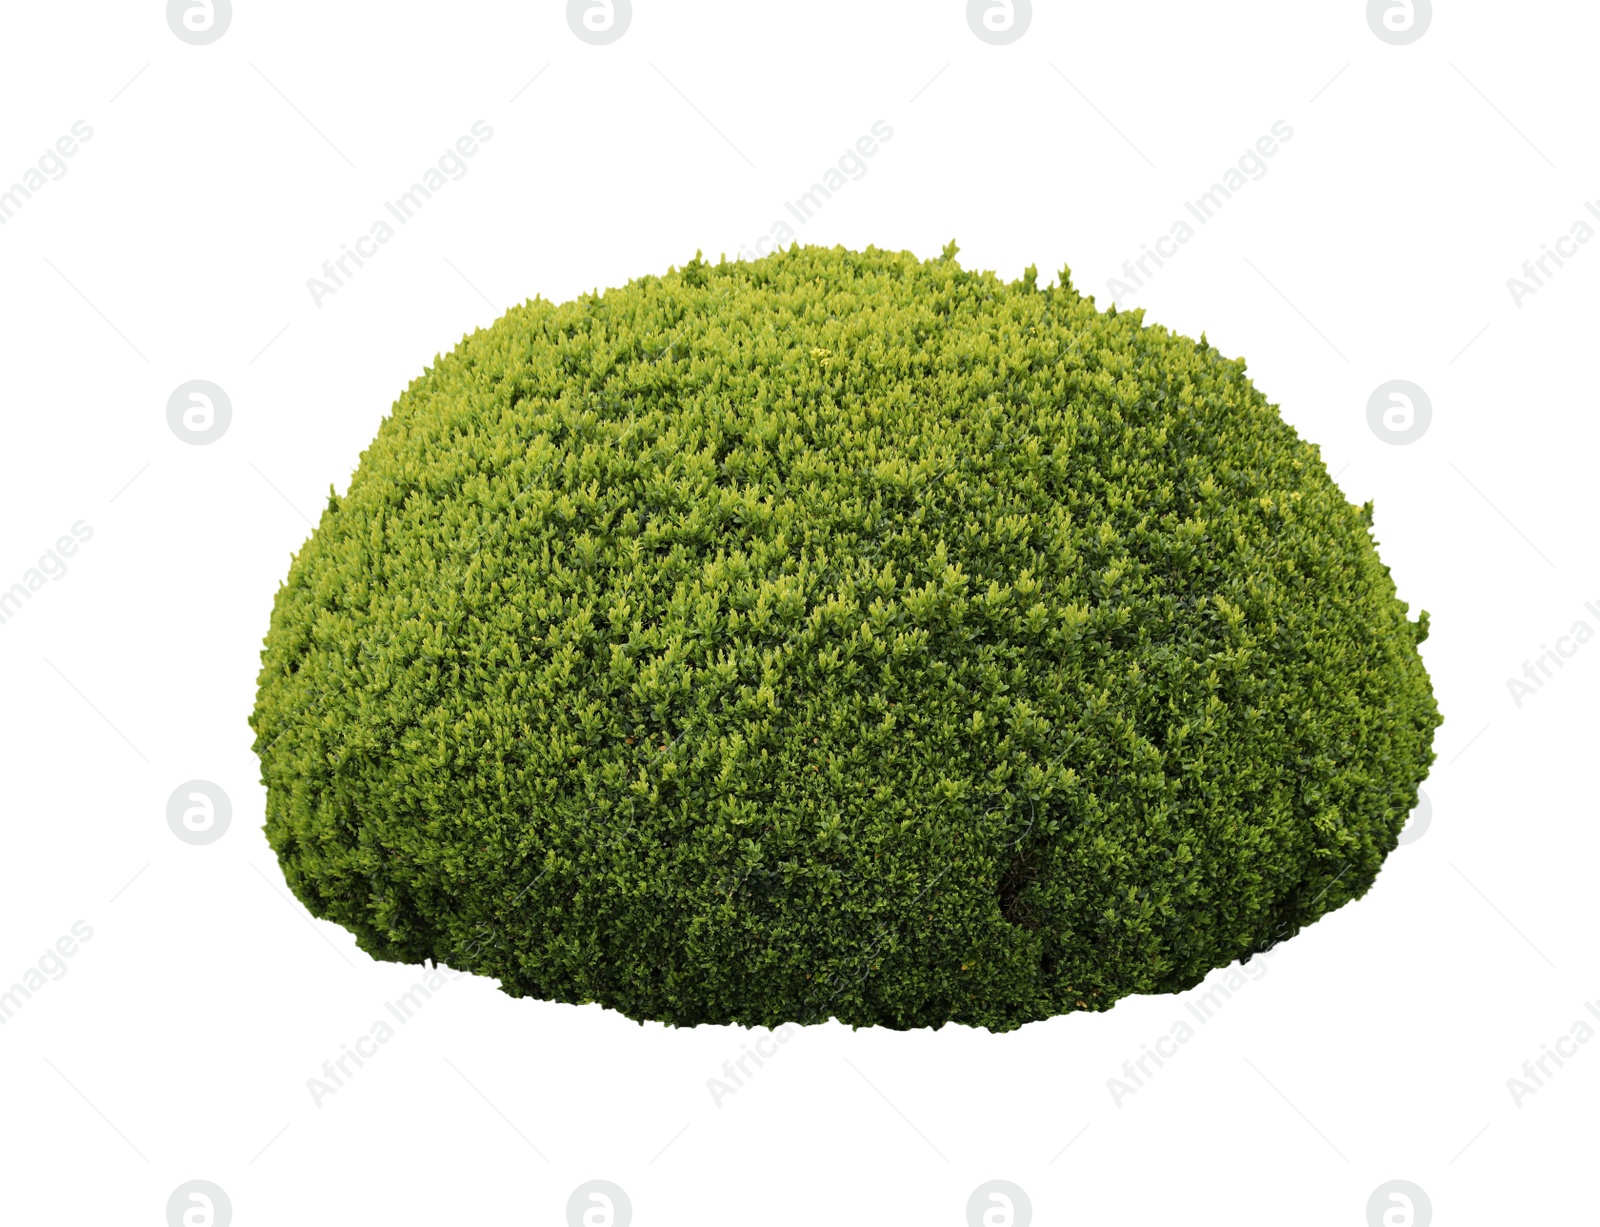 Image of Beautifully trimmed green conifer shrub isolated on white